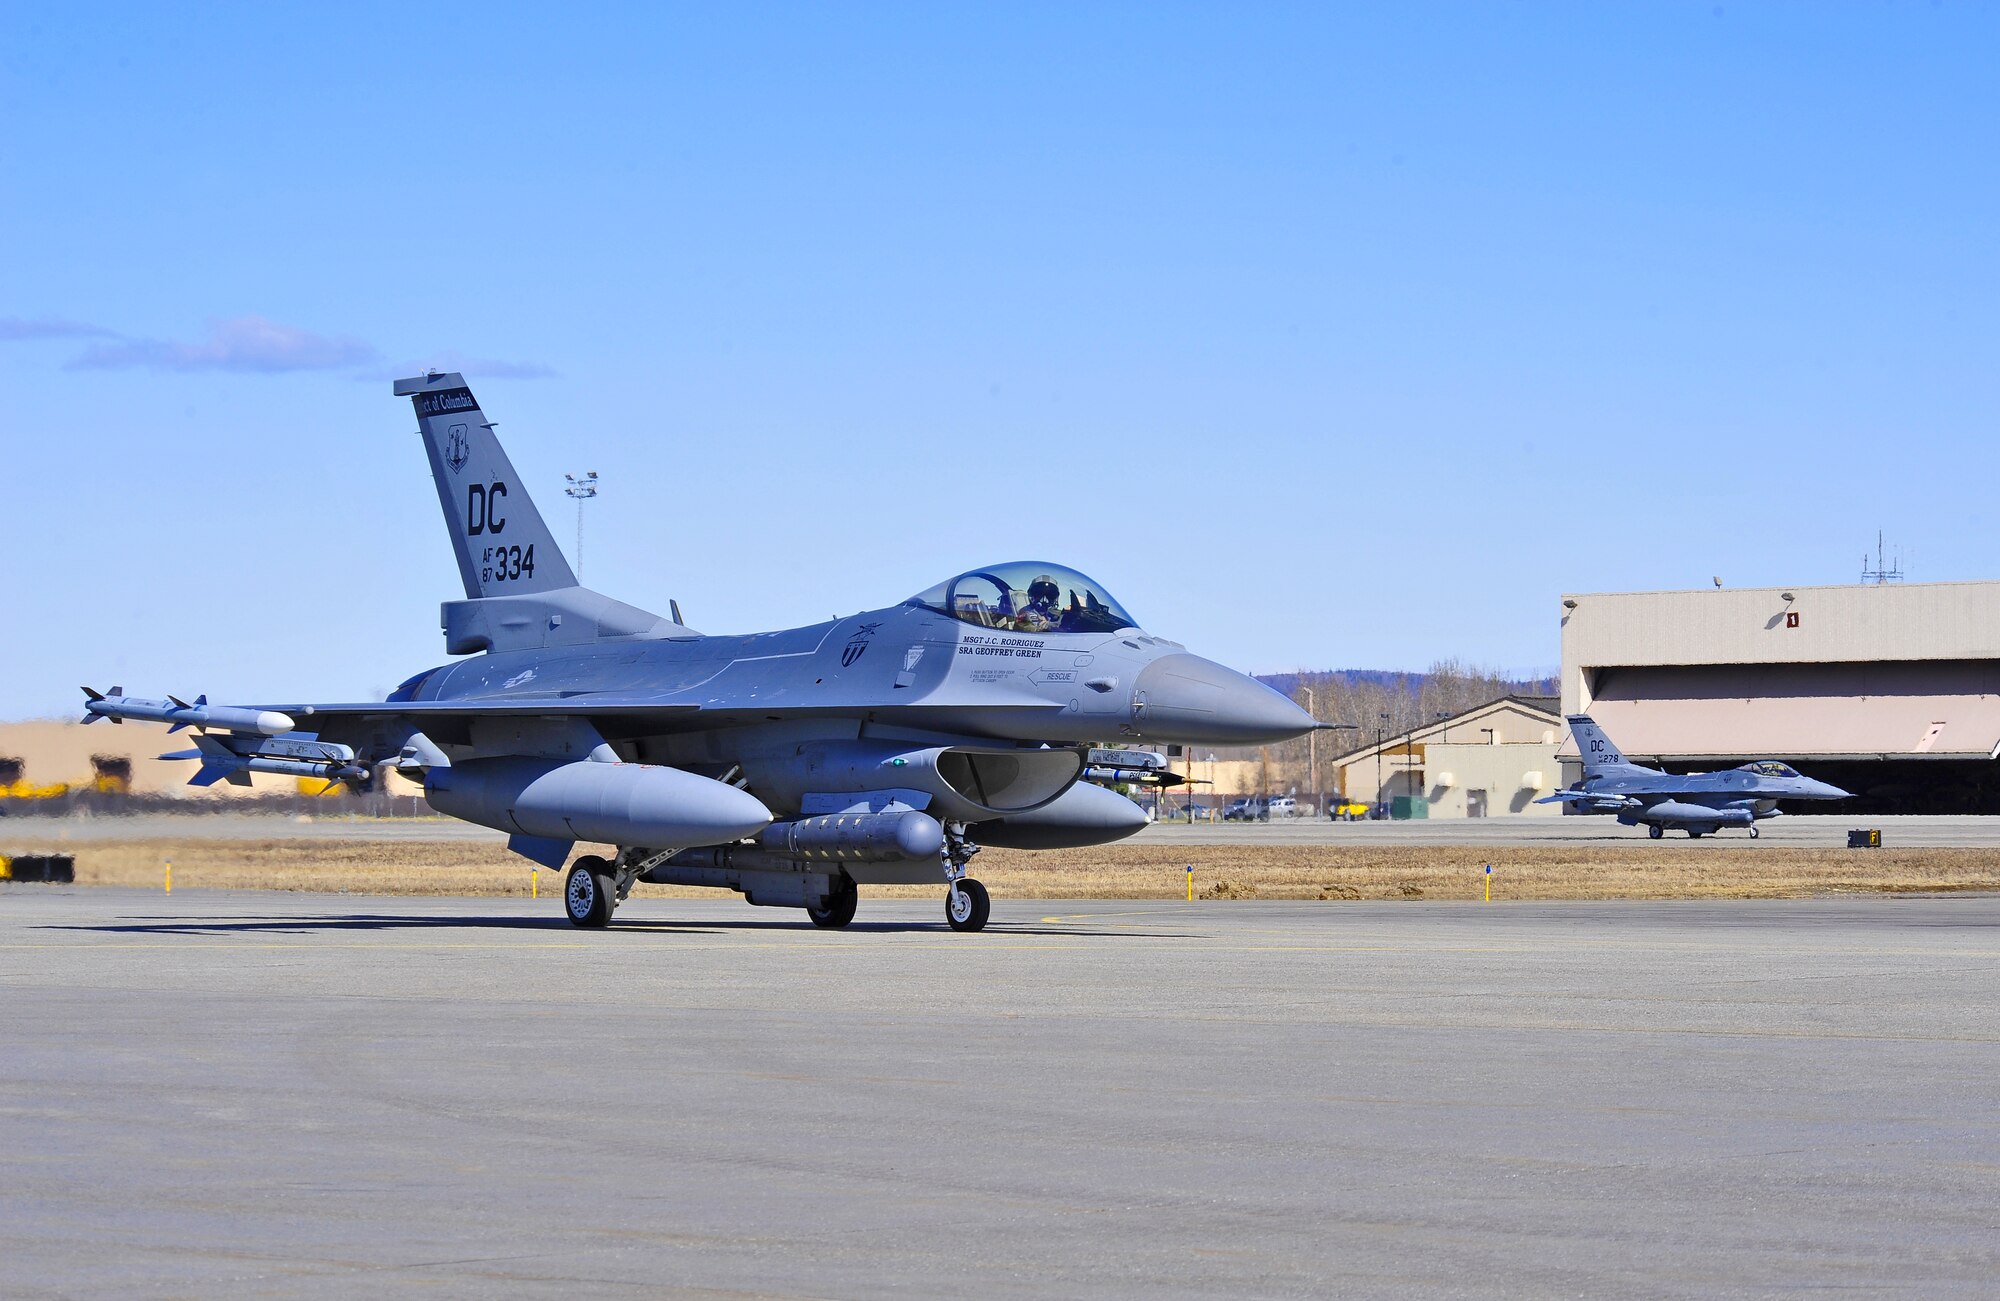 A pair of F-16 Fighting Falcon aircraft assigned to the 121st Fighter Squadron, Joint Base Andrews, Md., taxis down the flightline April 28, 2015, during Distant Frontier at Eielson Air Force Base, Alaska.  Distant Frontier is a preparation period during which RED FLAG-Alaska participants familiarize themselves with the airspace. (U.S. Air Force photo by Tech. Sgt. Miguel Lara III/Released)